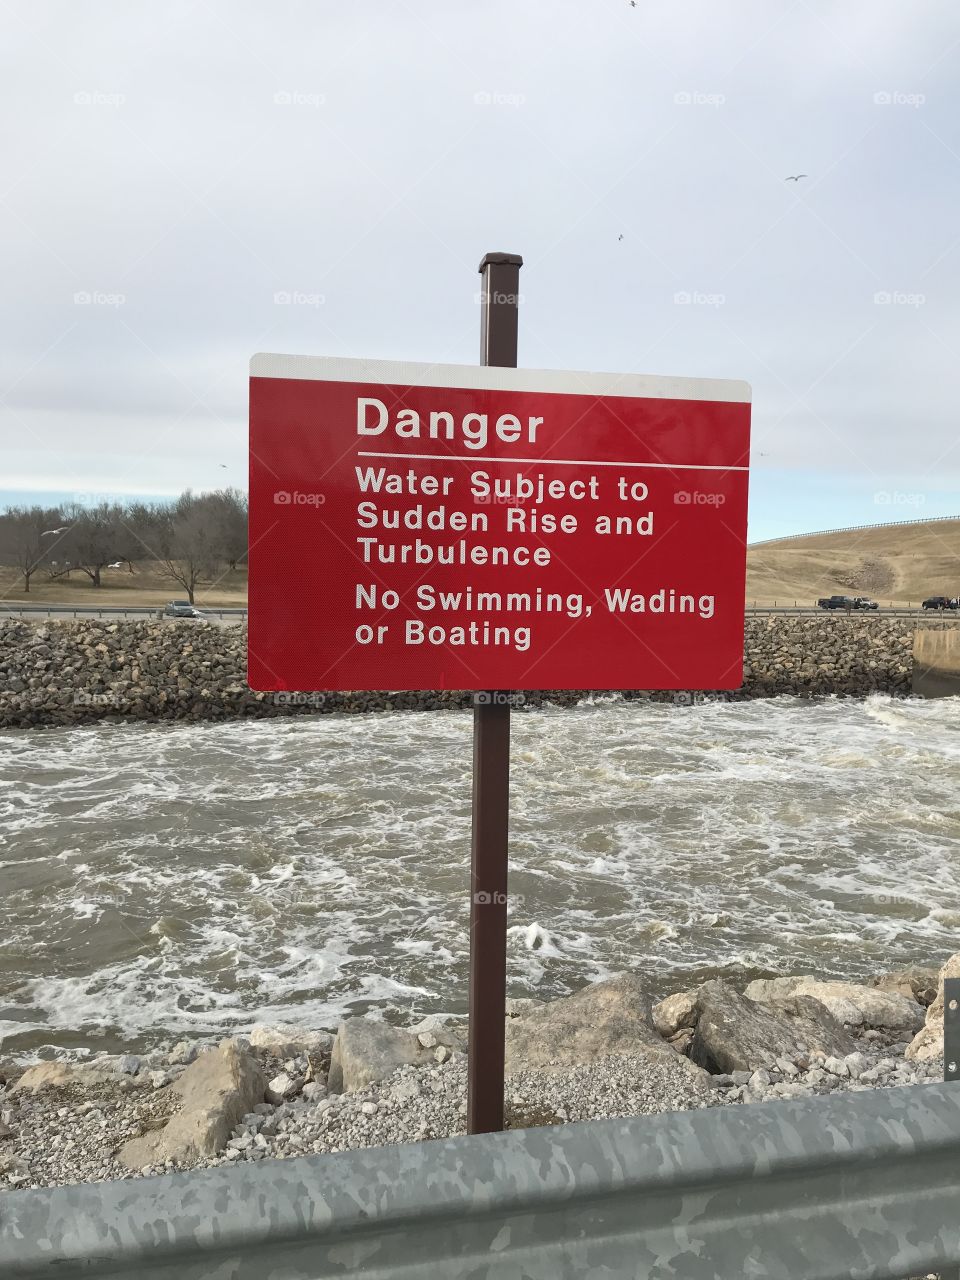 US Army Corps of Engineers, Lake Oologah water release channel during water release in winter, January, sign warning of Danger, riprap along water in channel to prevent erosion.